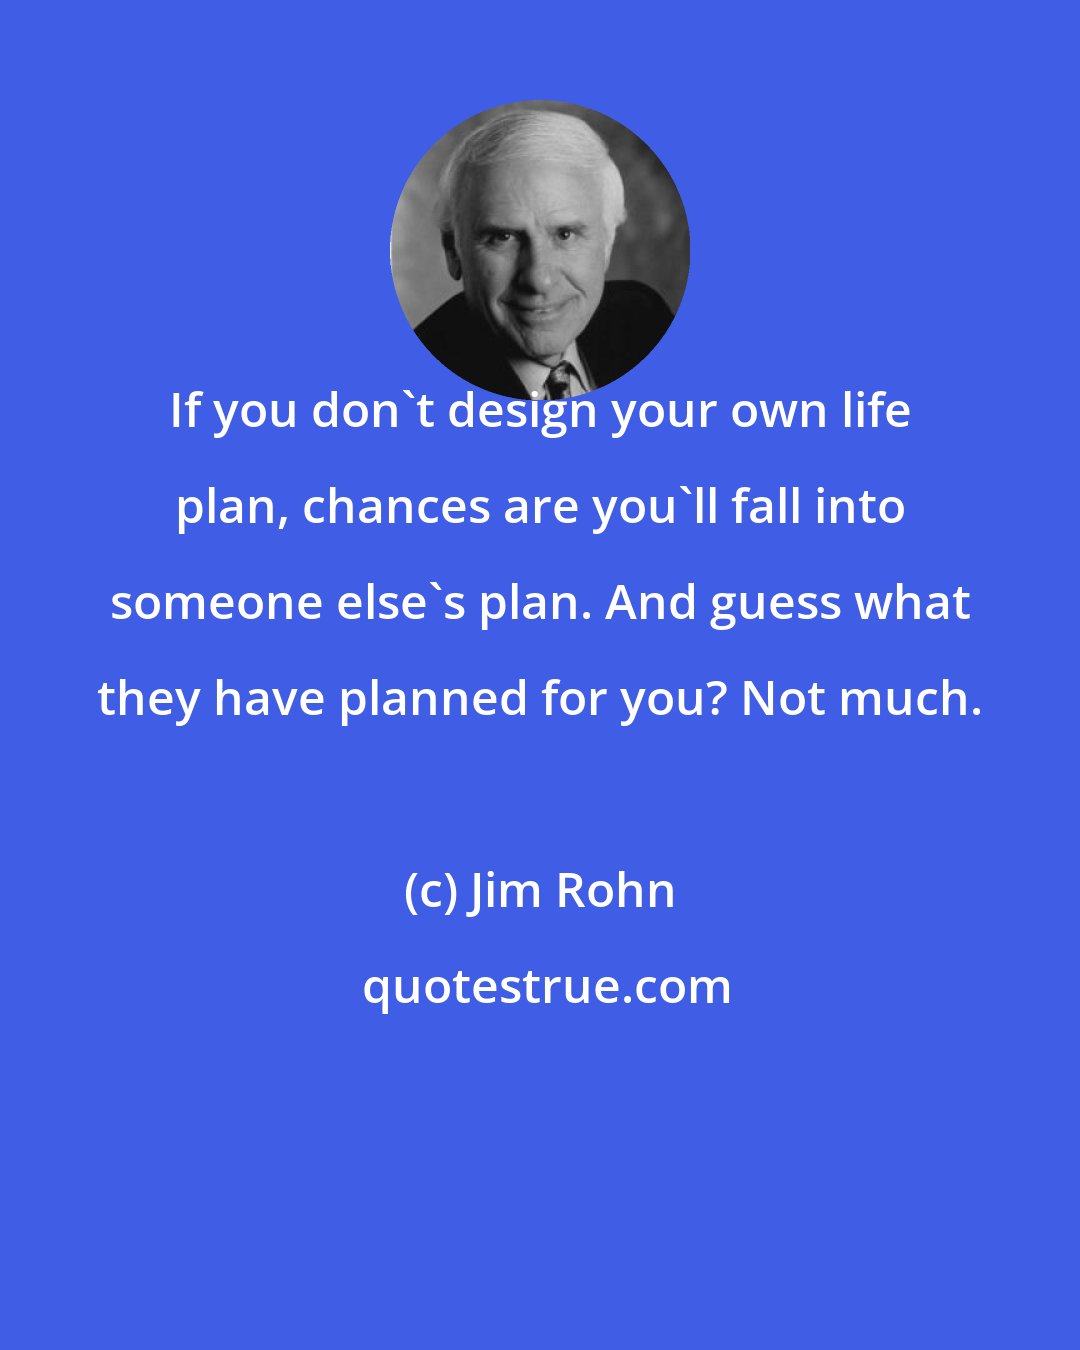 Jim Rohn: If you don't design your own life plan, chances are you'll fall into someone else's plan. And guess what they have planned for you? Not much.